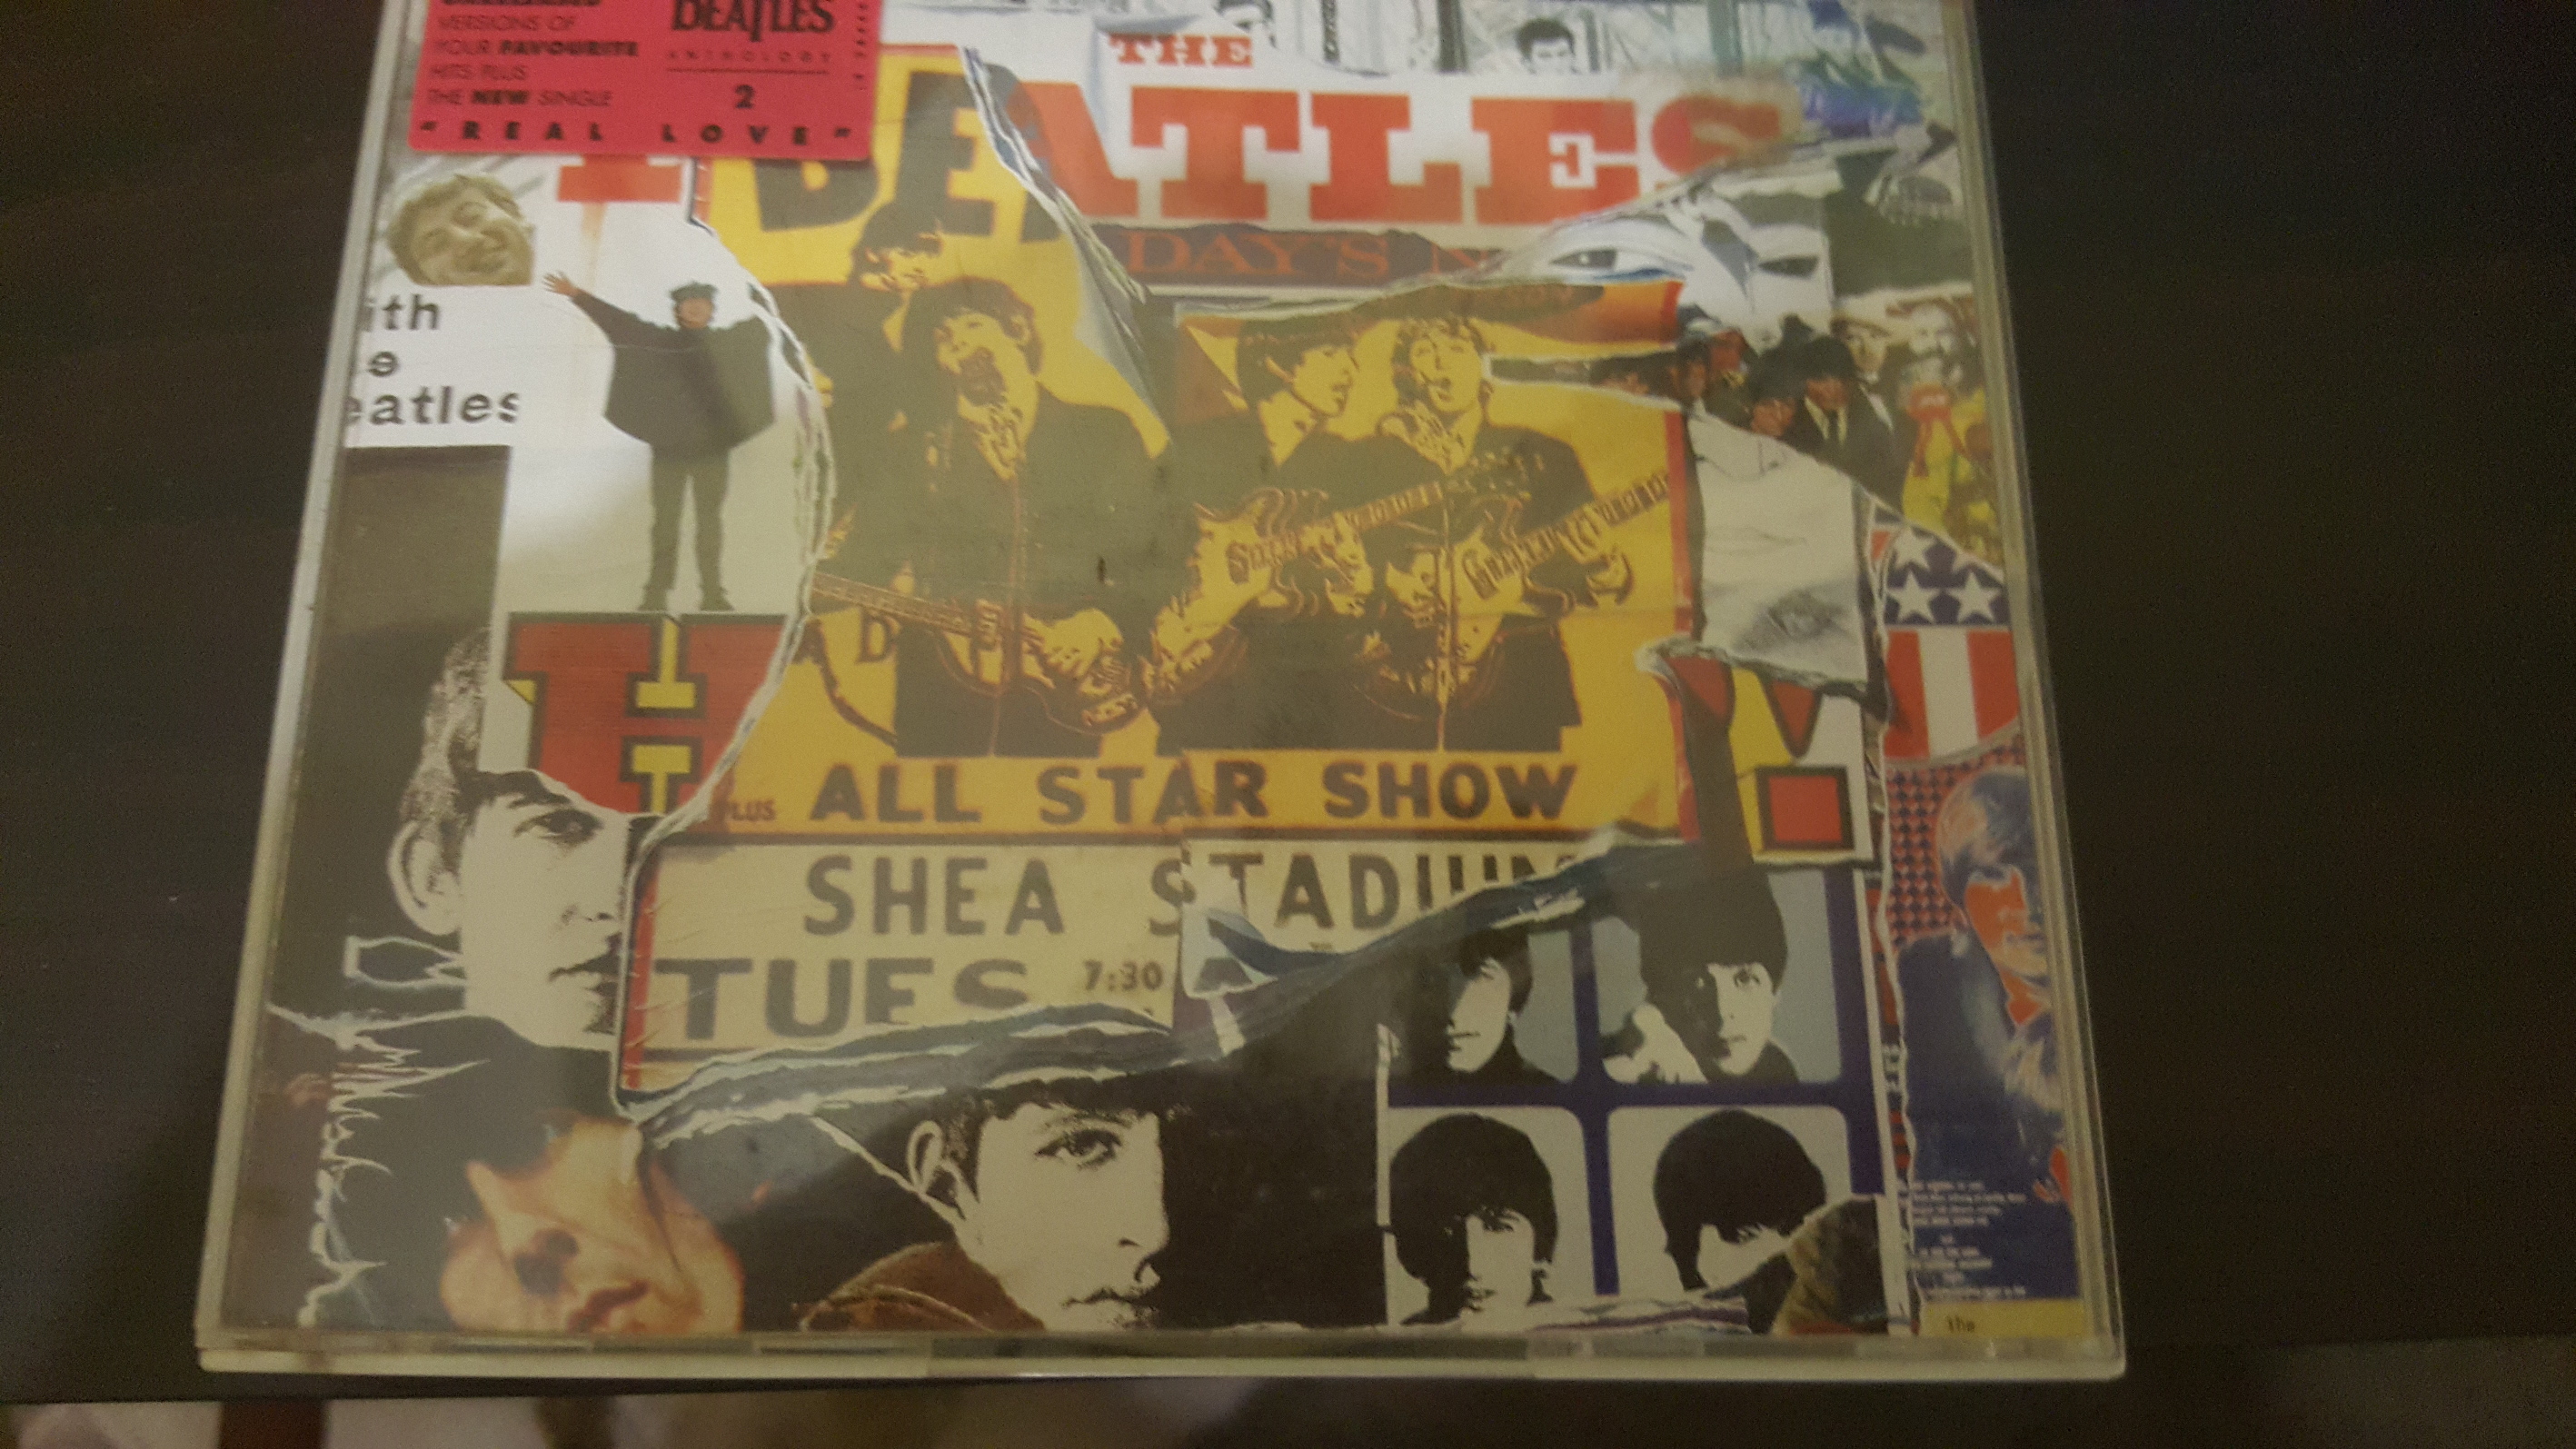 The Beatles Anthology Show at SHEA Stadium 2 Excellent CDS New